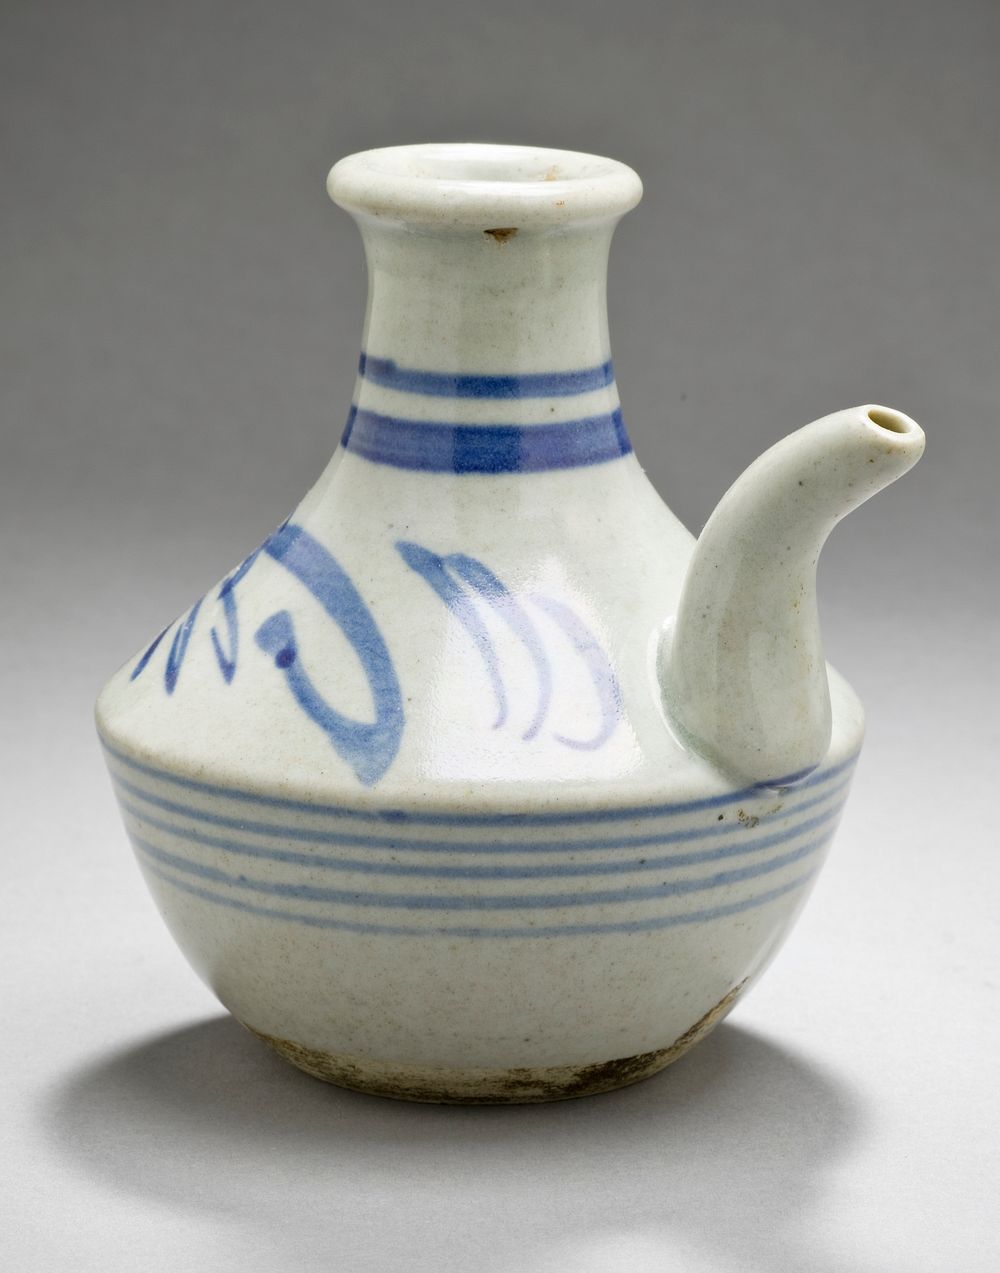 Spouted Sake Bottle with Design of Grasses